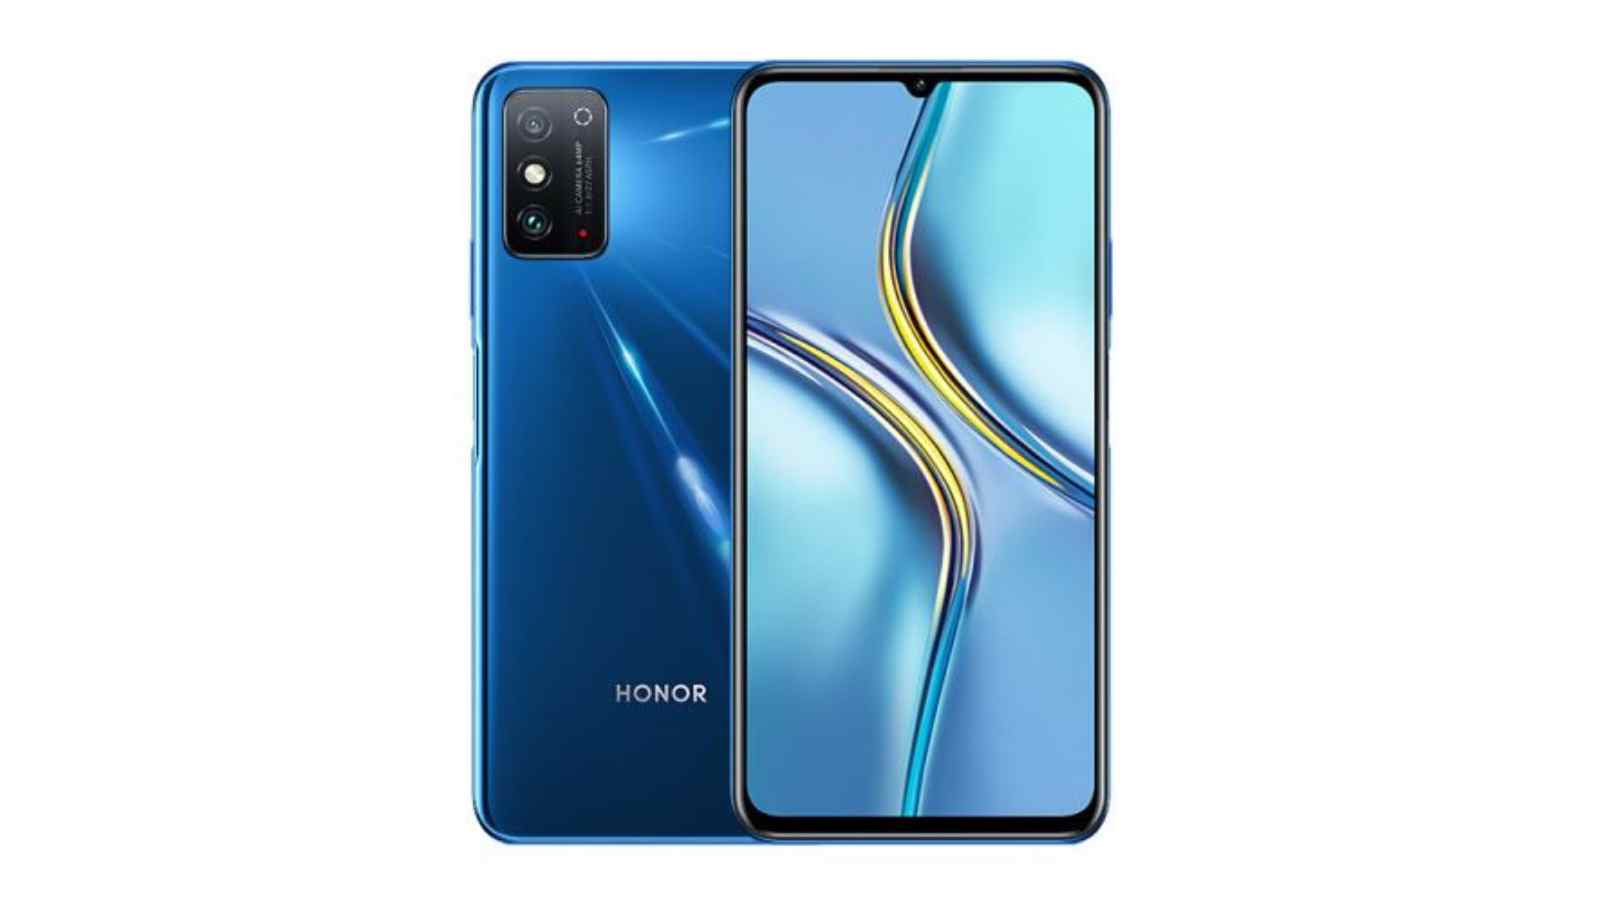 HONOR X30 Max with MediaTek Dimensity 900, 64MP dual rear camera launched: Price, Specifications